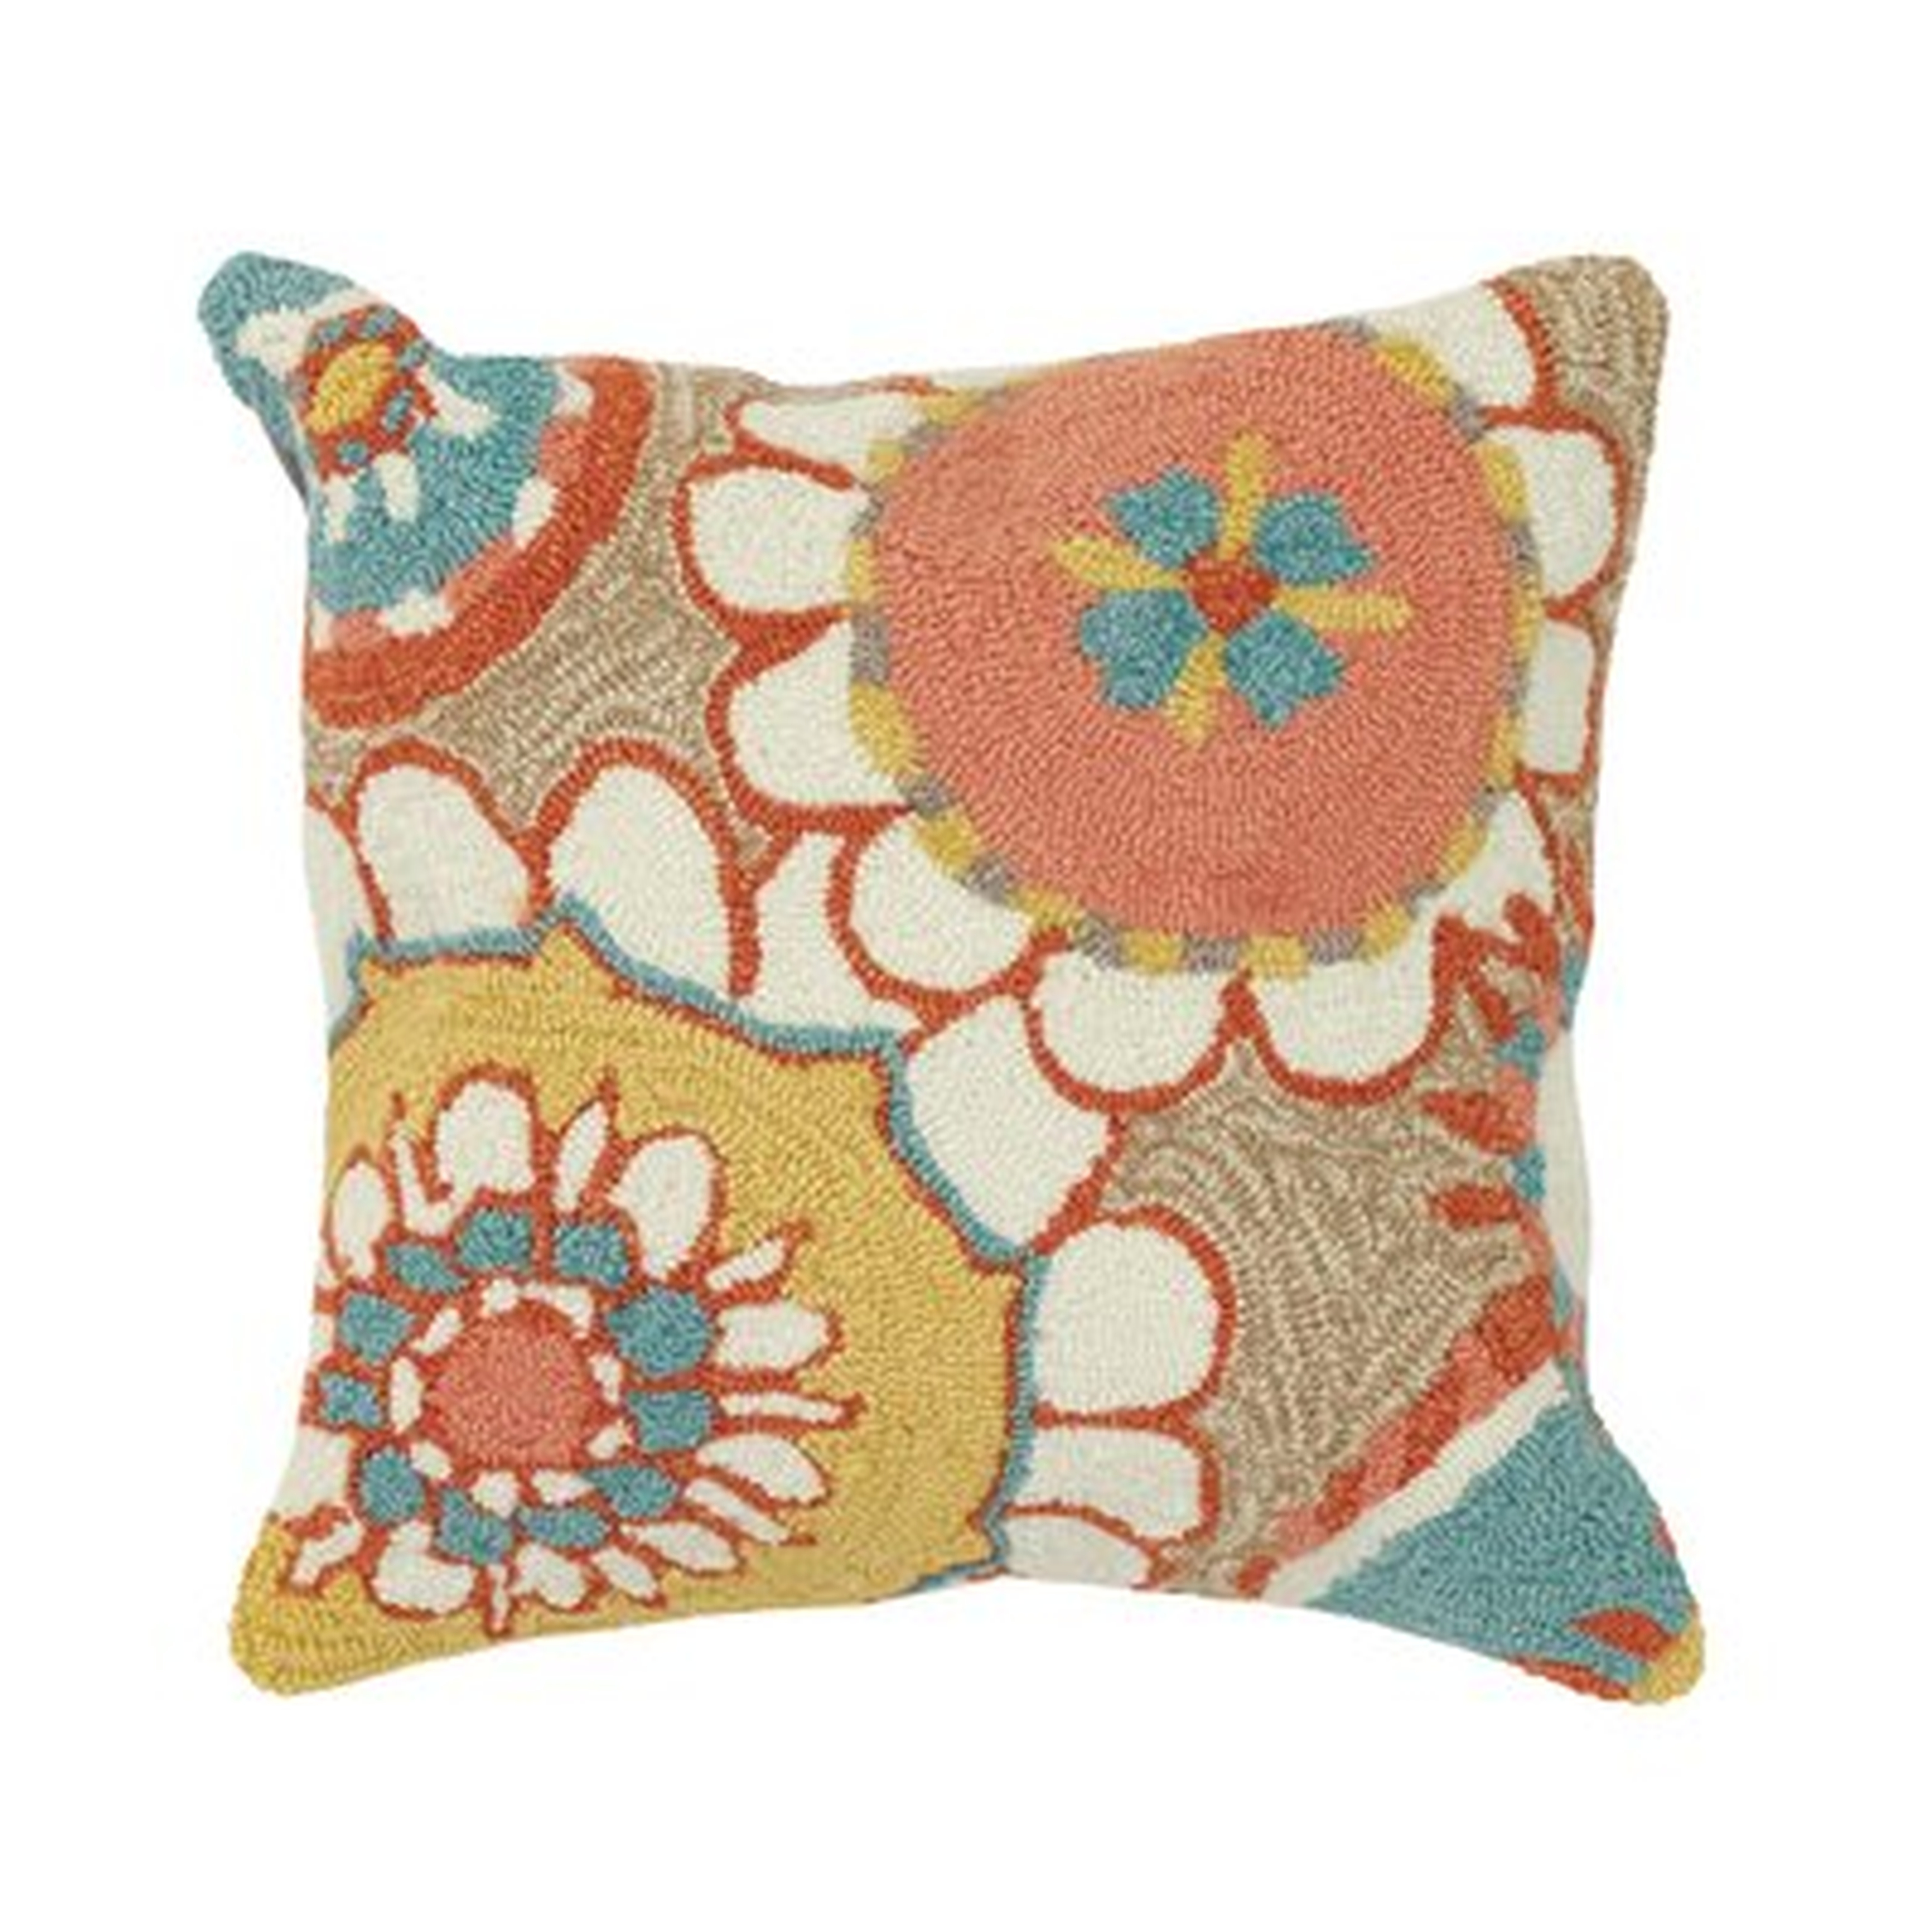 Outdoor Square Pillow Cover & Insert - Wayfair